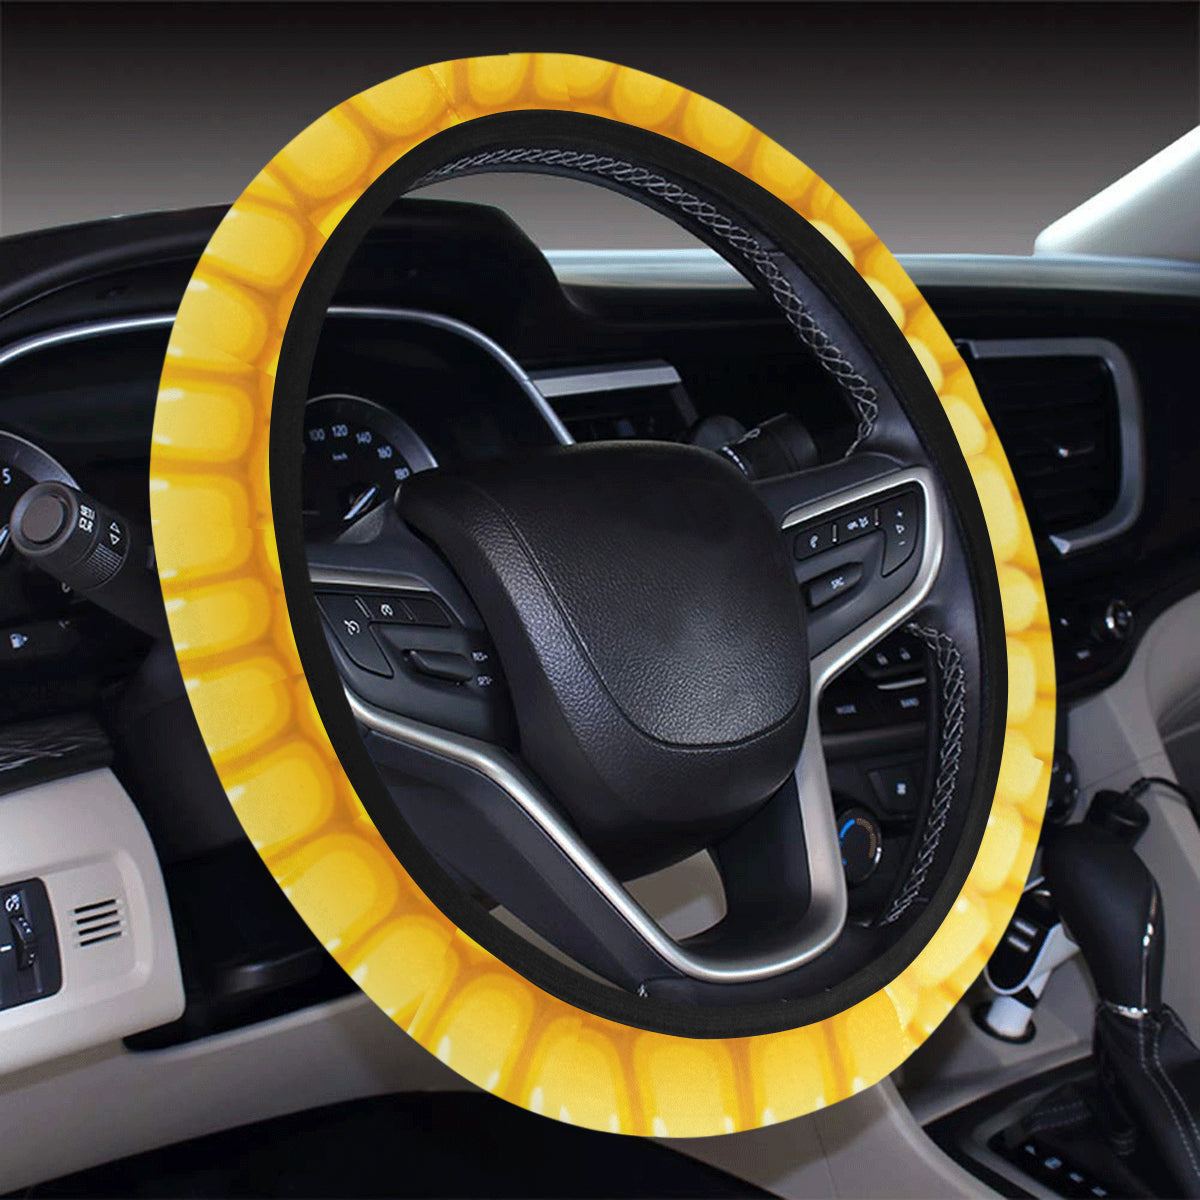 Agricultural Corn cob Pattern Steering Wheel Cover with Elastic Edge